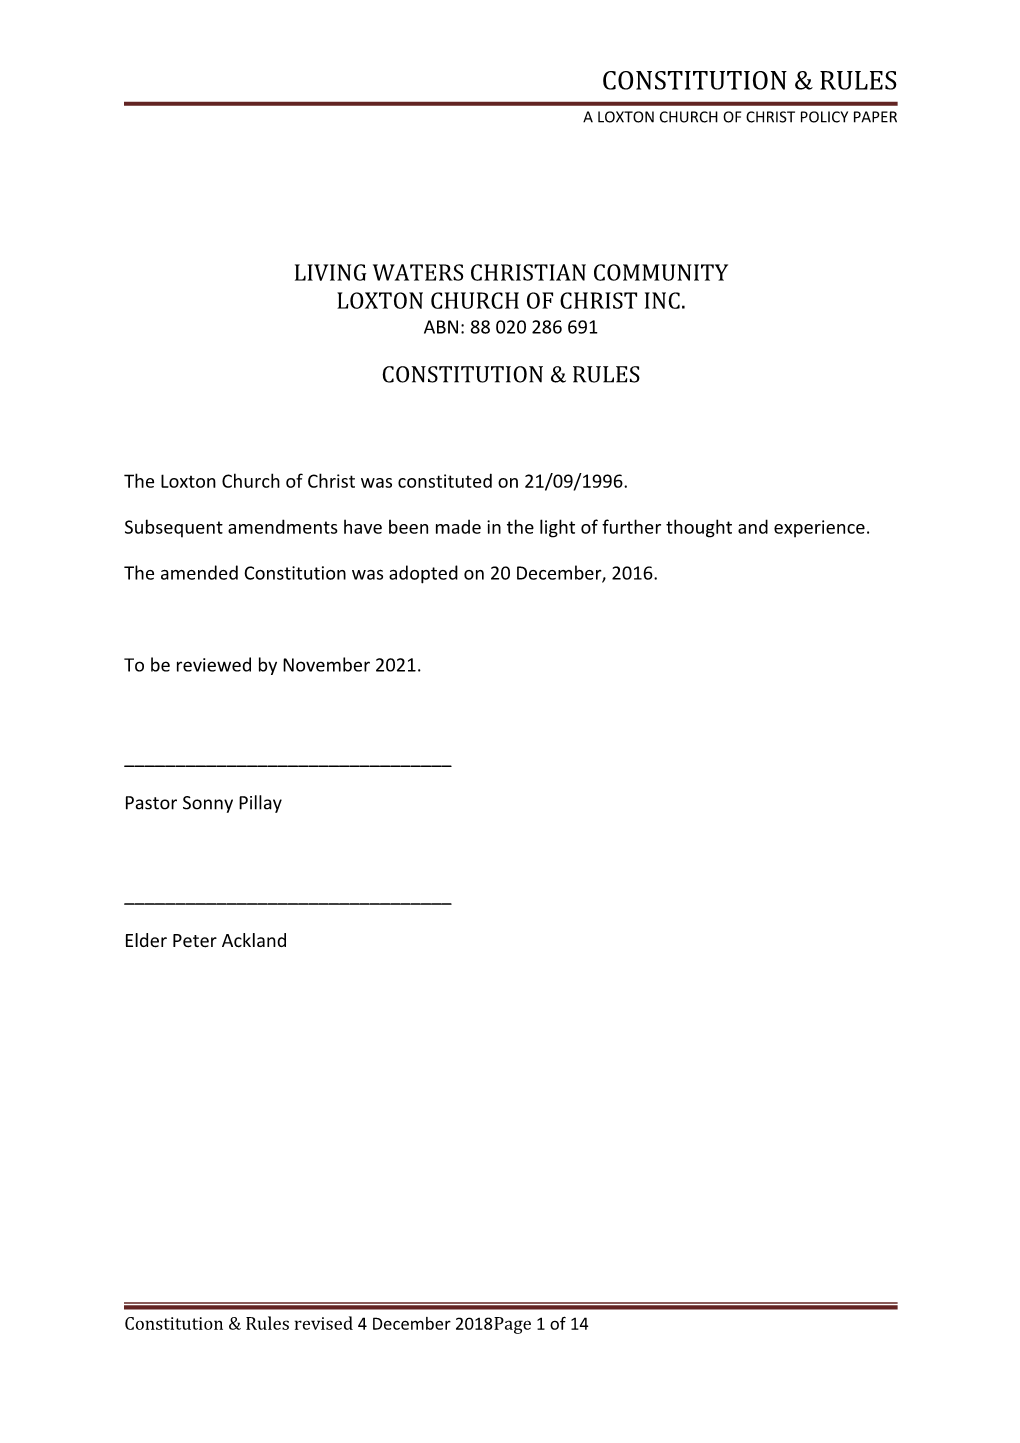 A Loxton Church of Christ Policy Paper